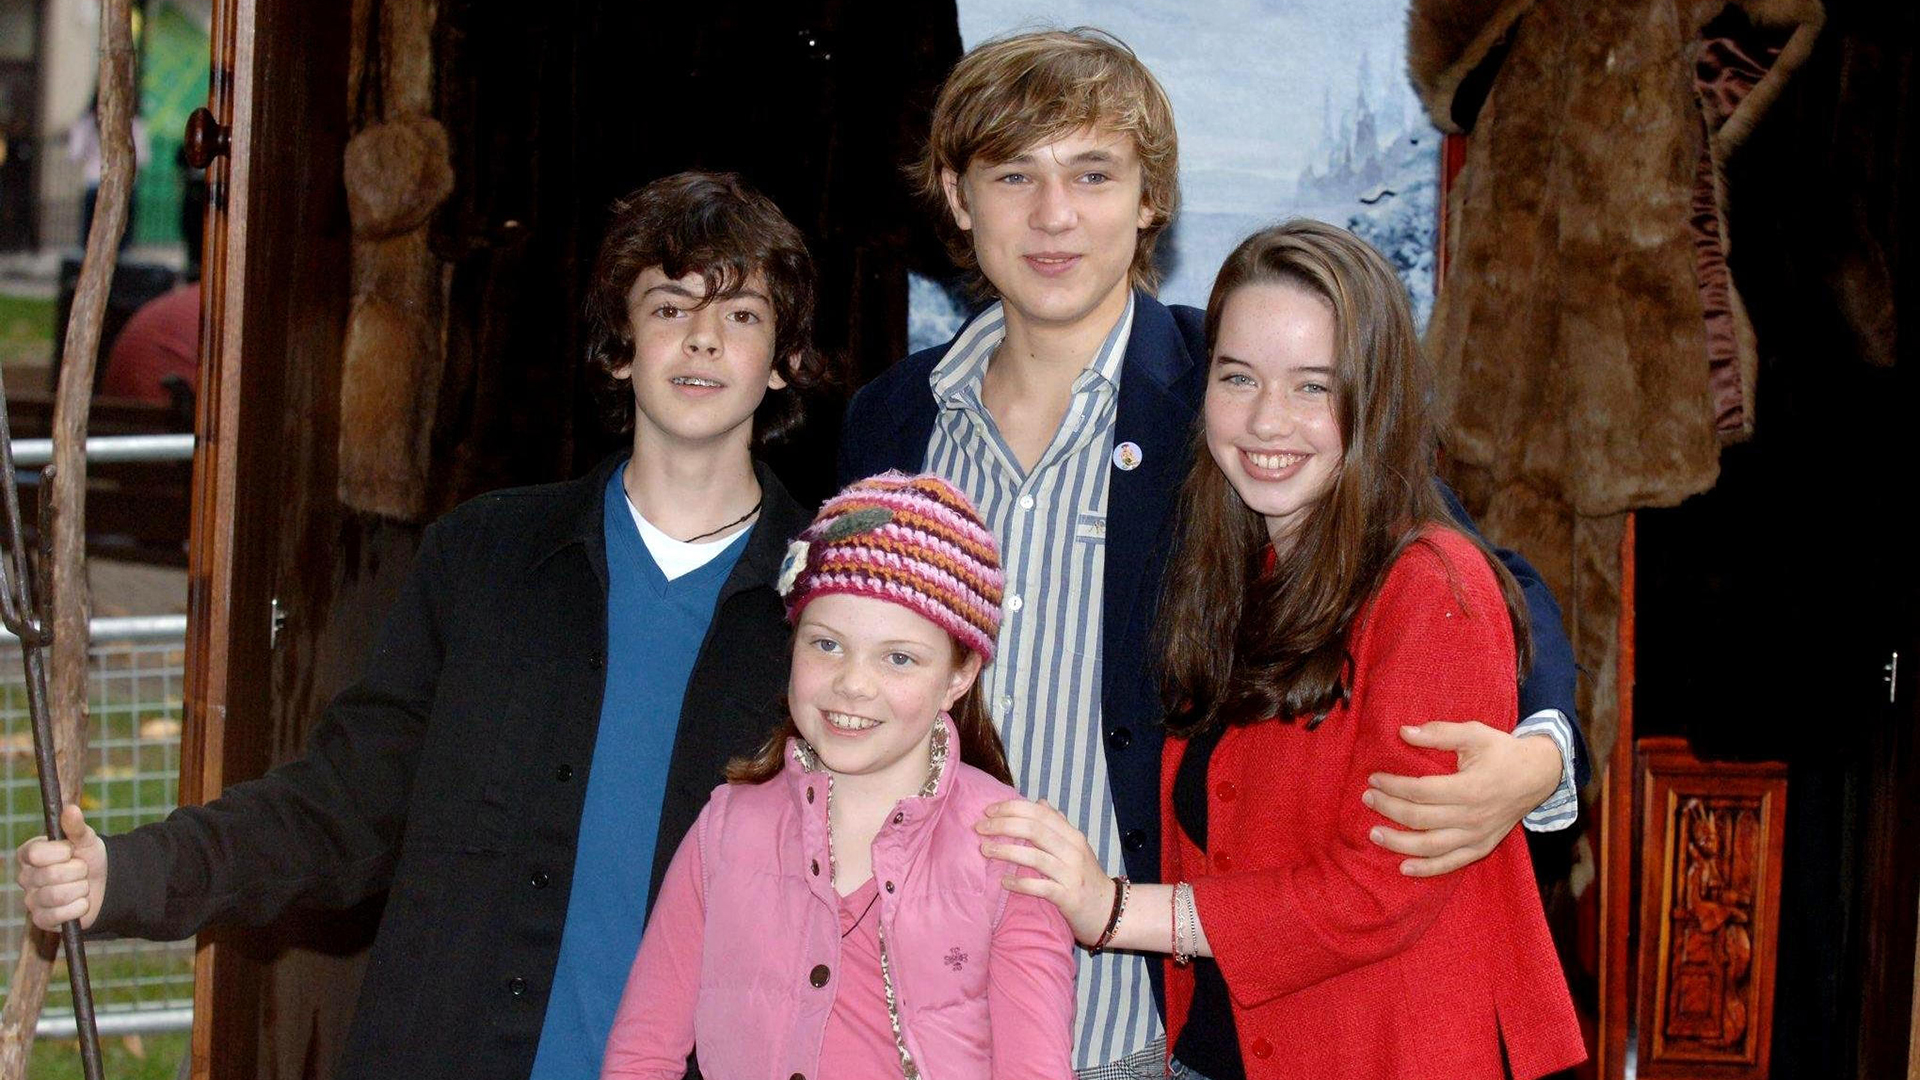 Here's What The Chronicles of Narnia Stars Look Like Now